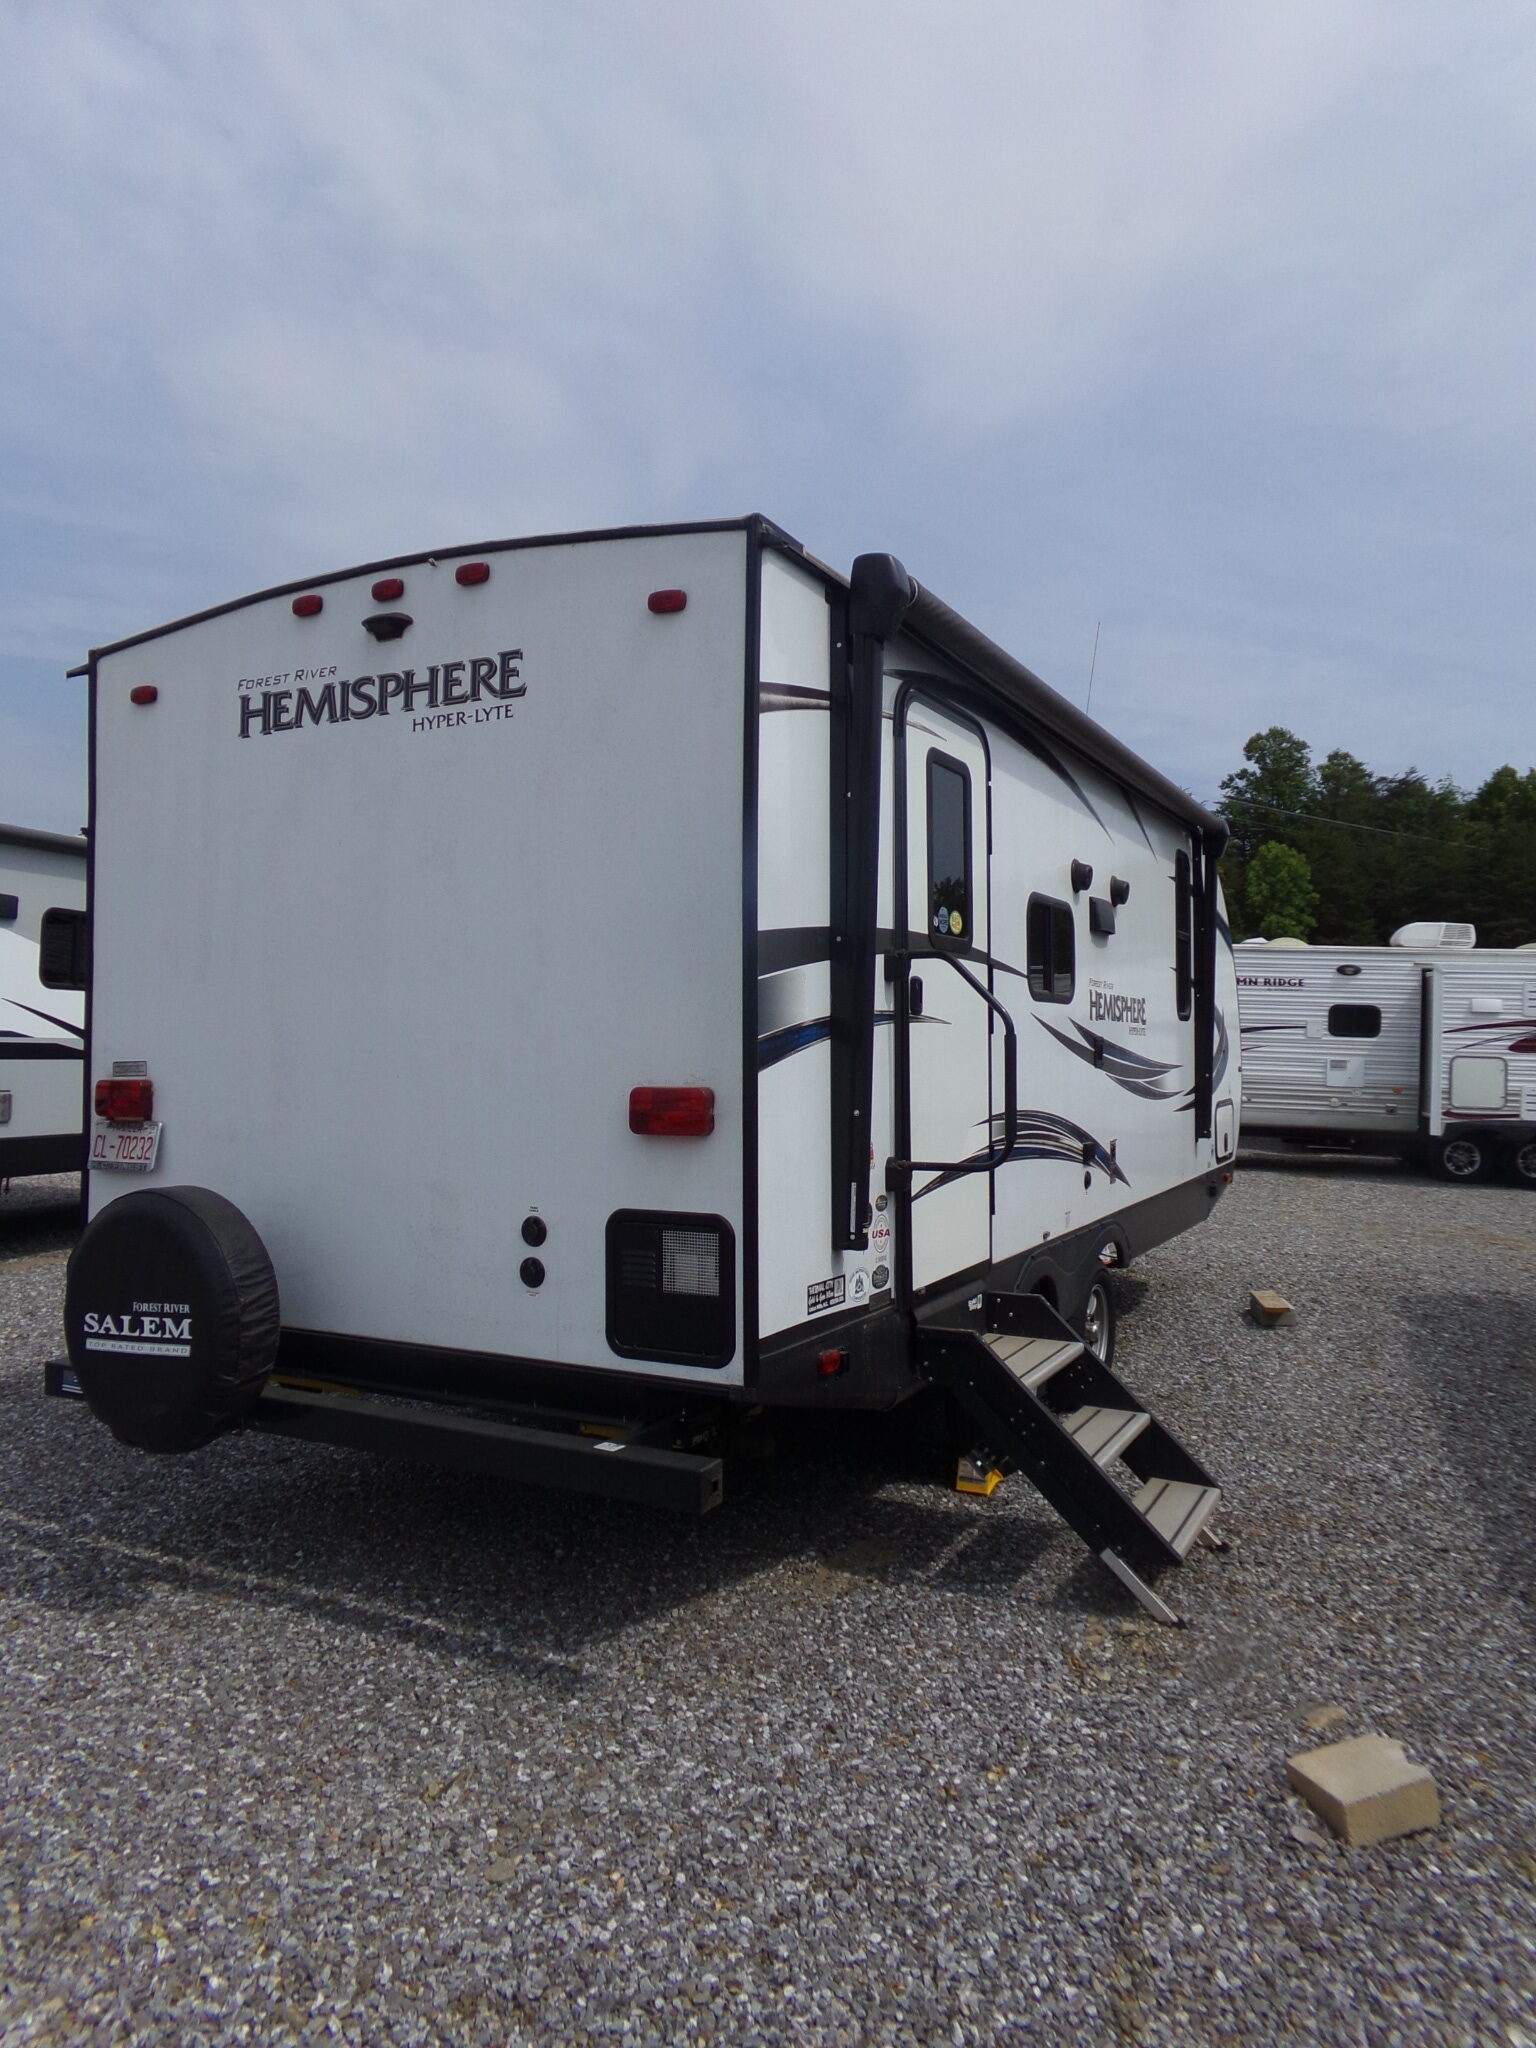 Camper Dealer of RV within driving distance of Elkin, NC.